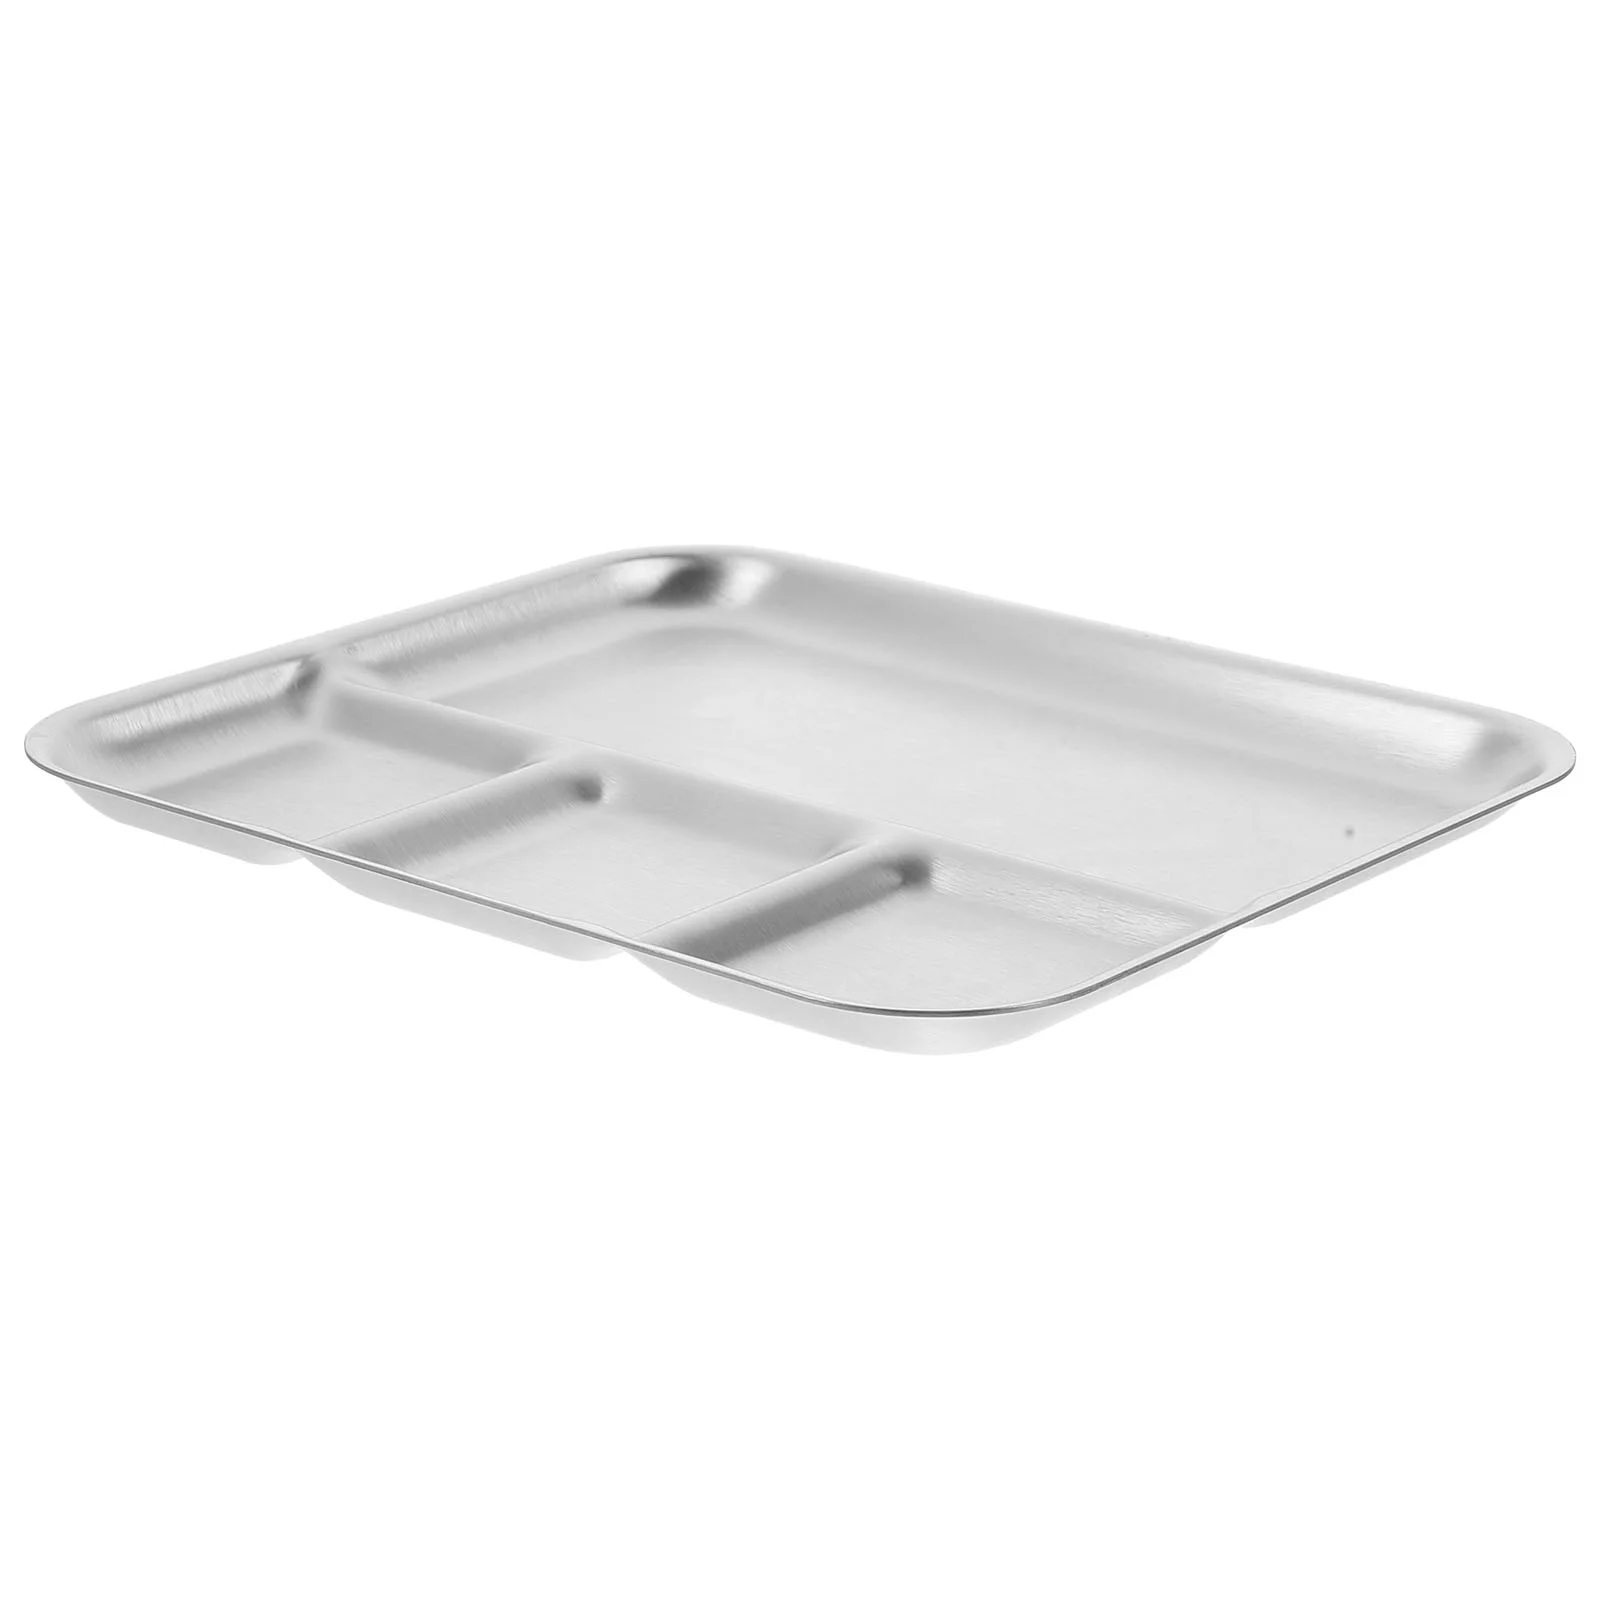 

Divided Dinner Plates Stainless Steel Snack Serving Plate 4 Compartment Metal Food Trays Kids Adults Camping Diet Food